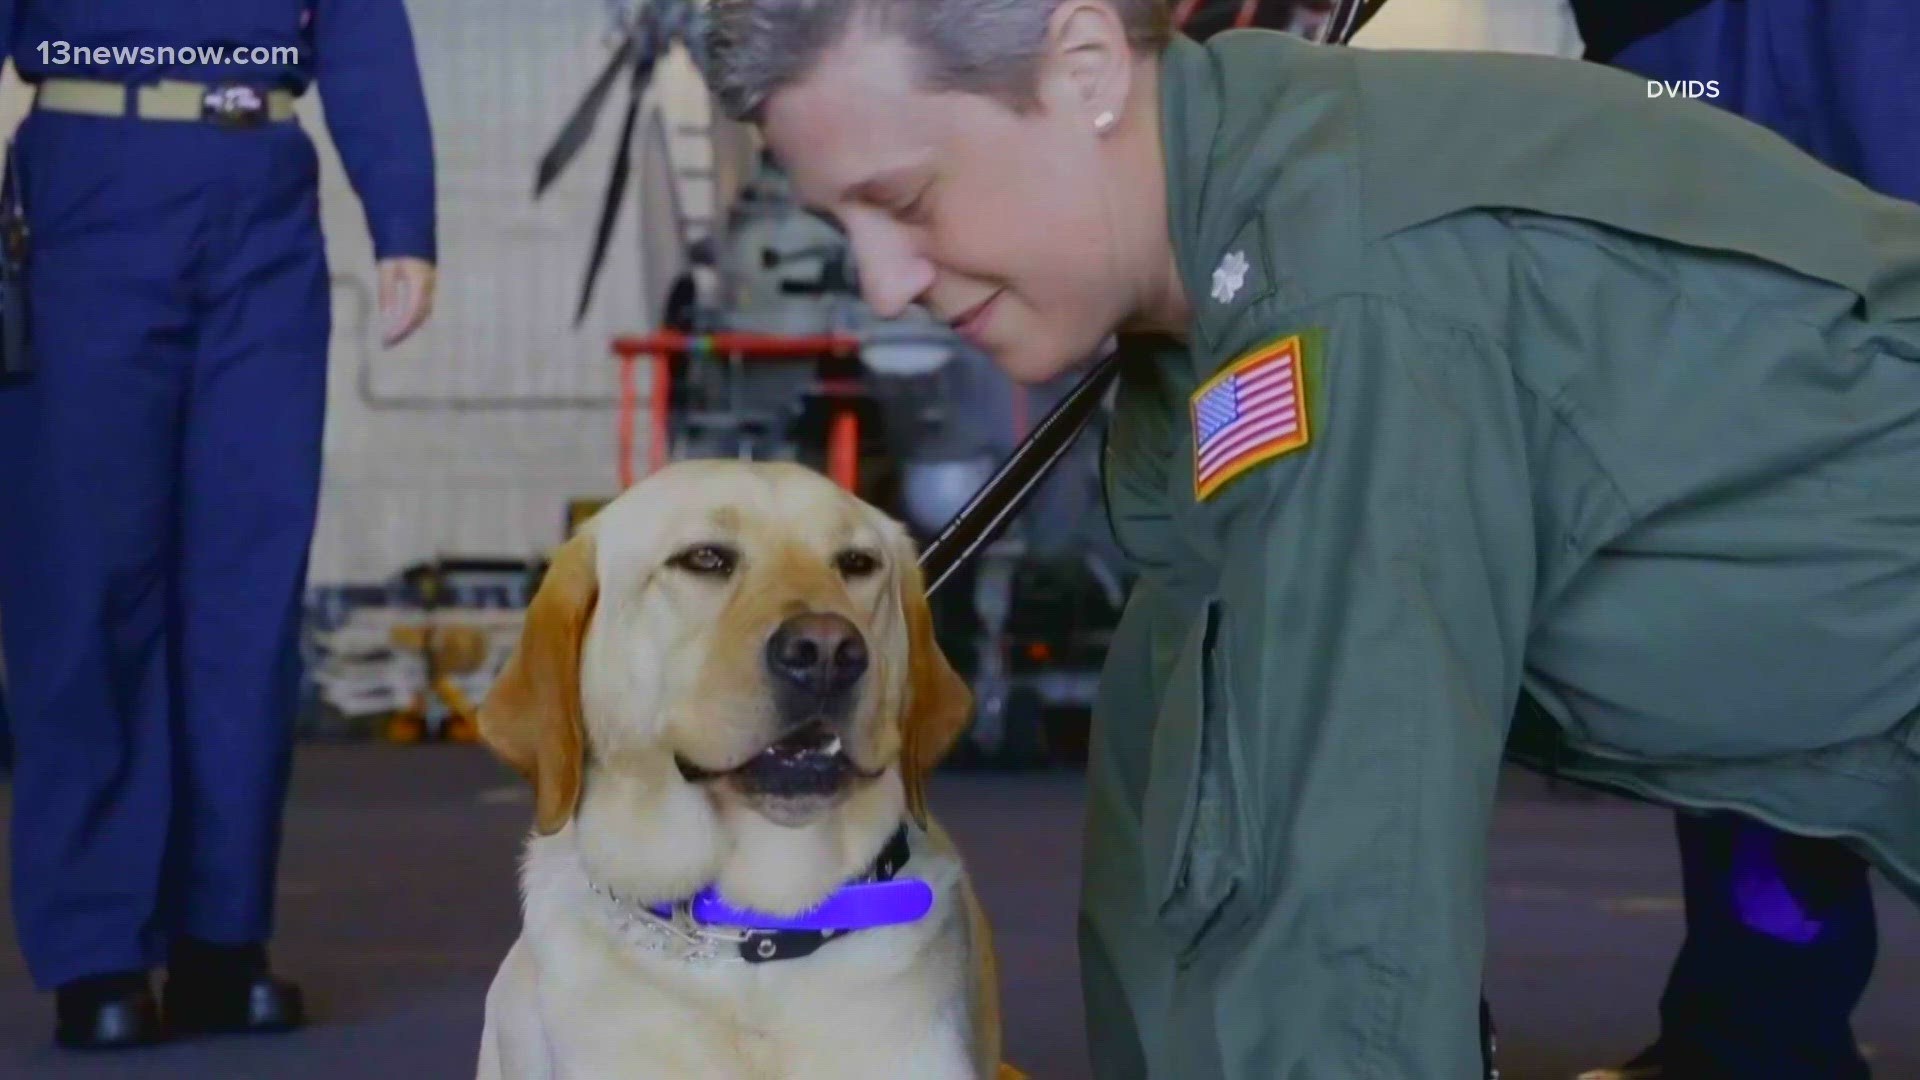 Sage helped human shipmates cope with stress during their more than 8-month-long deployment.